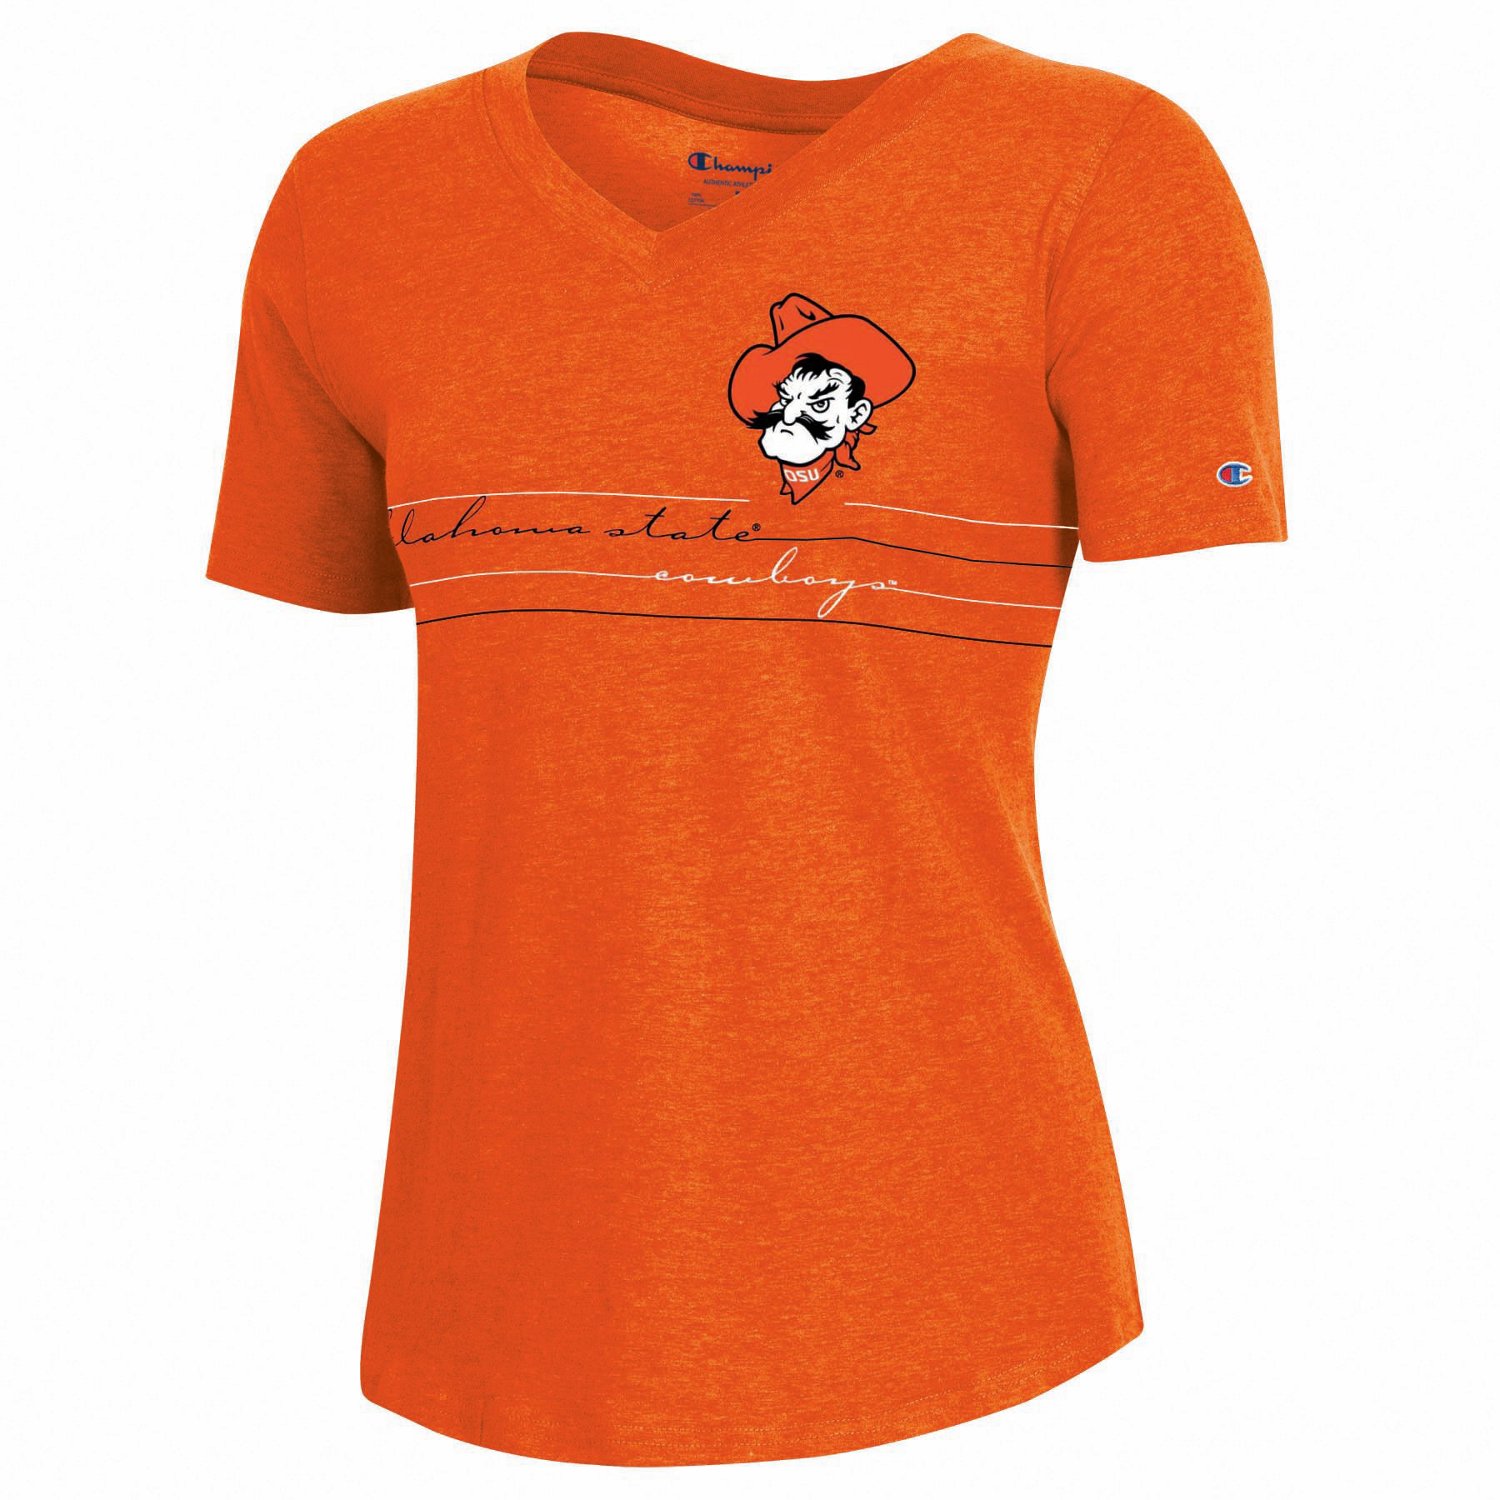 Champion Women's Oklahoma State University Heathered Relaxed Fit V-neck ...